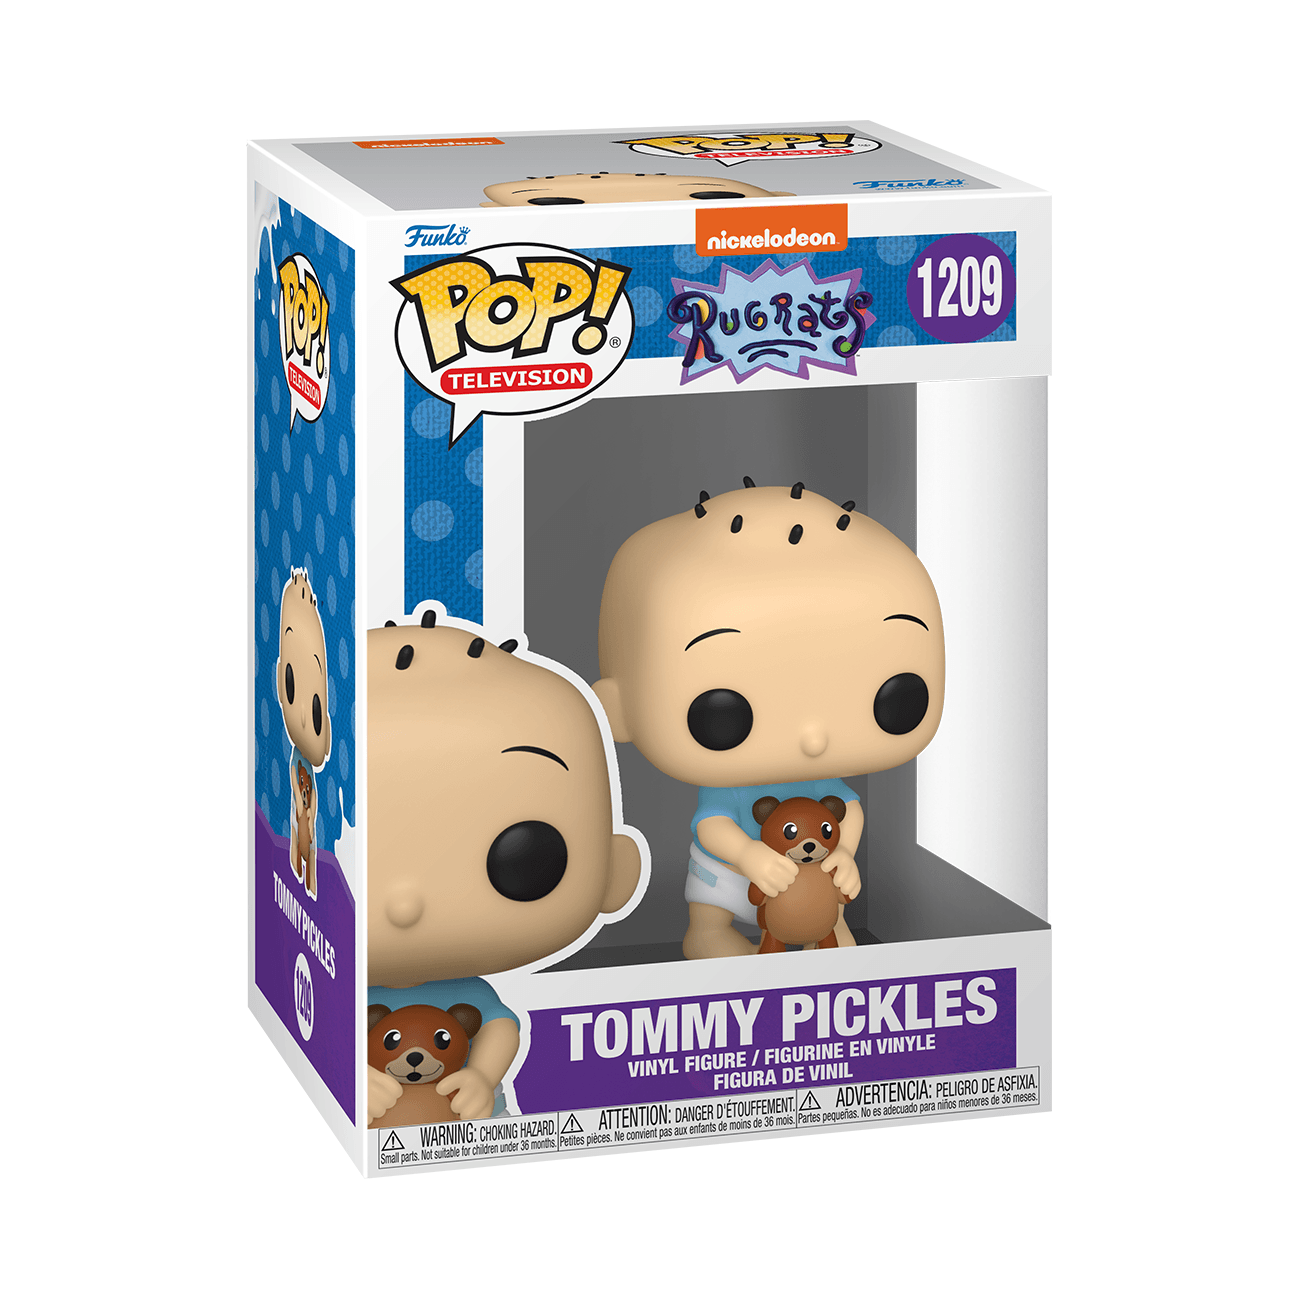 Pop! Television - Rugrats - Tommy Pickles - #1209 - Hobby Champion Inc